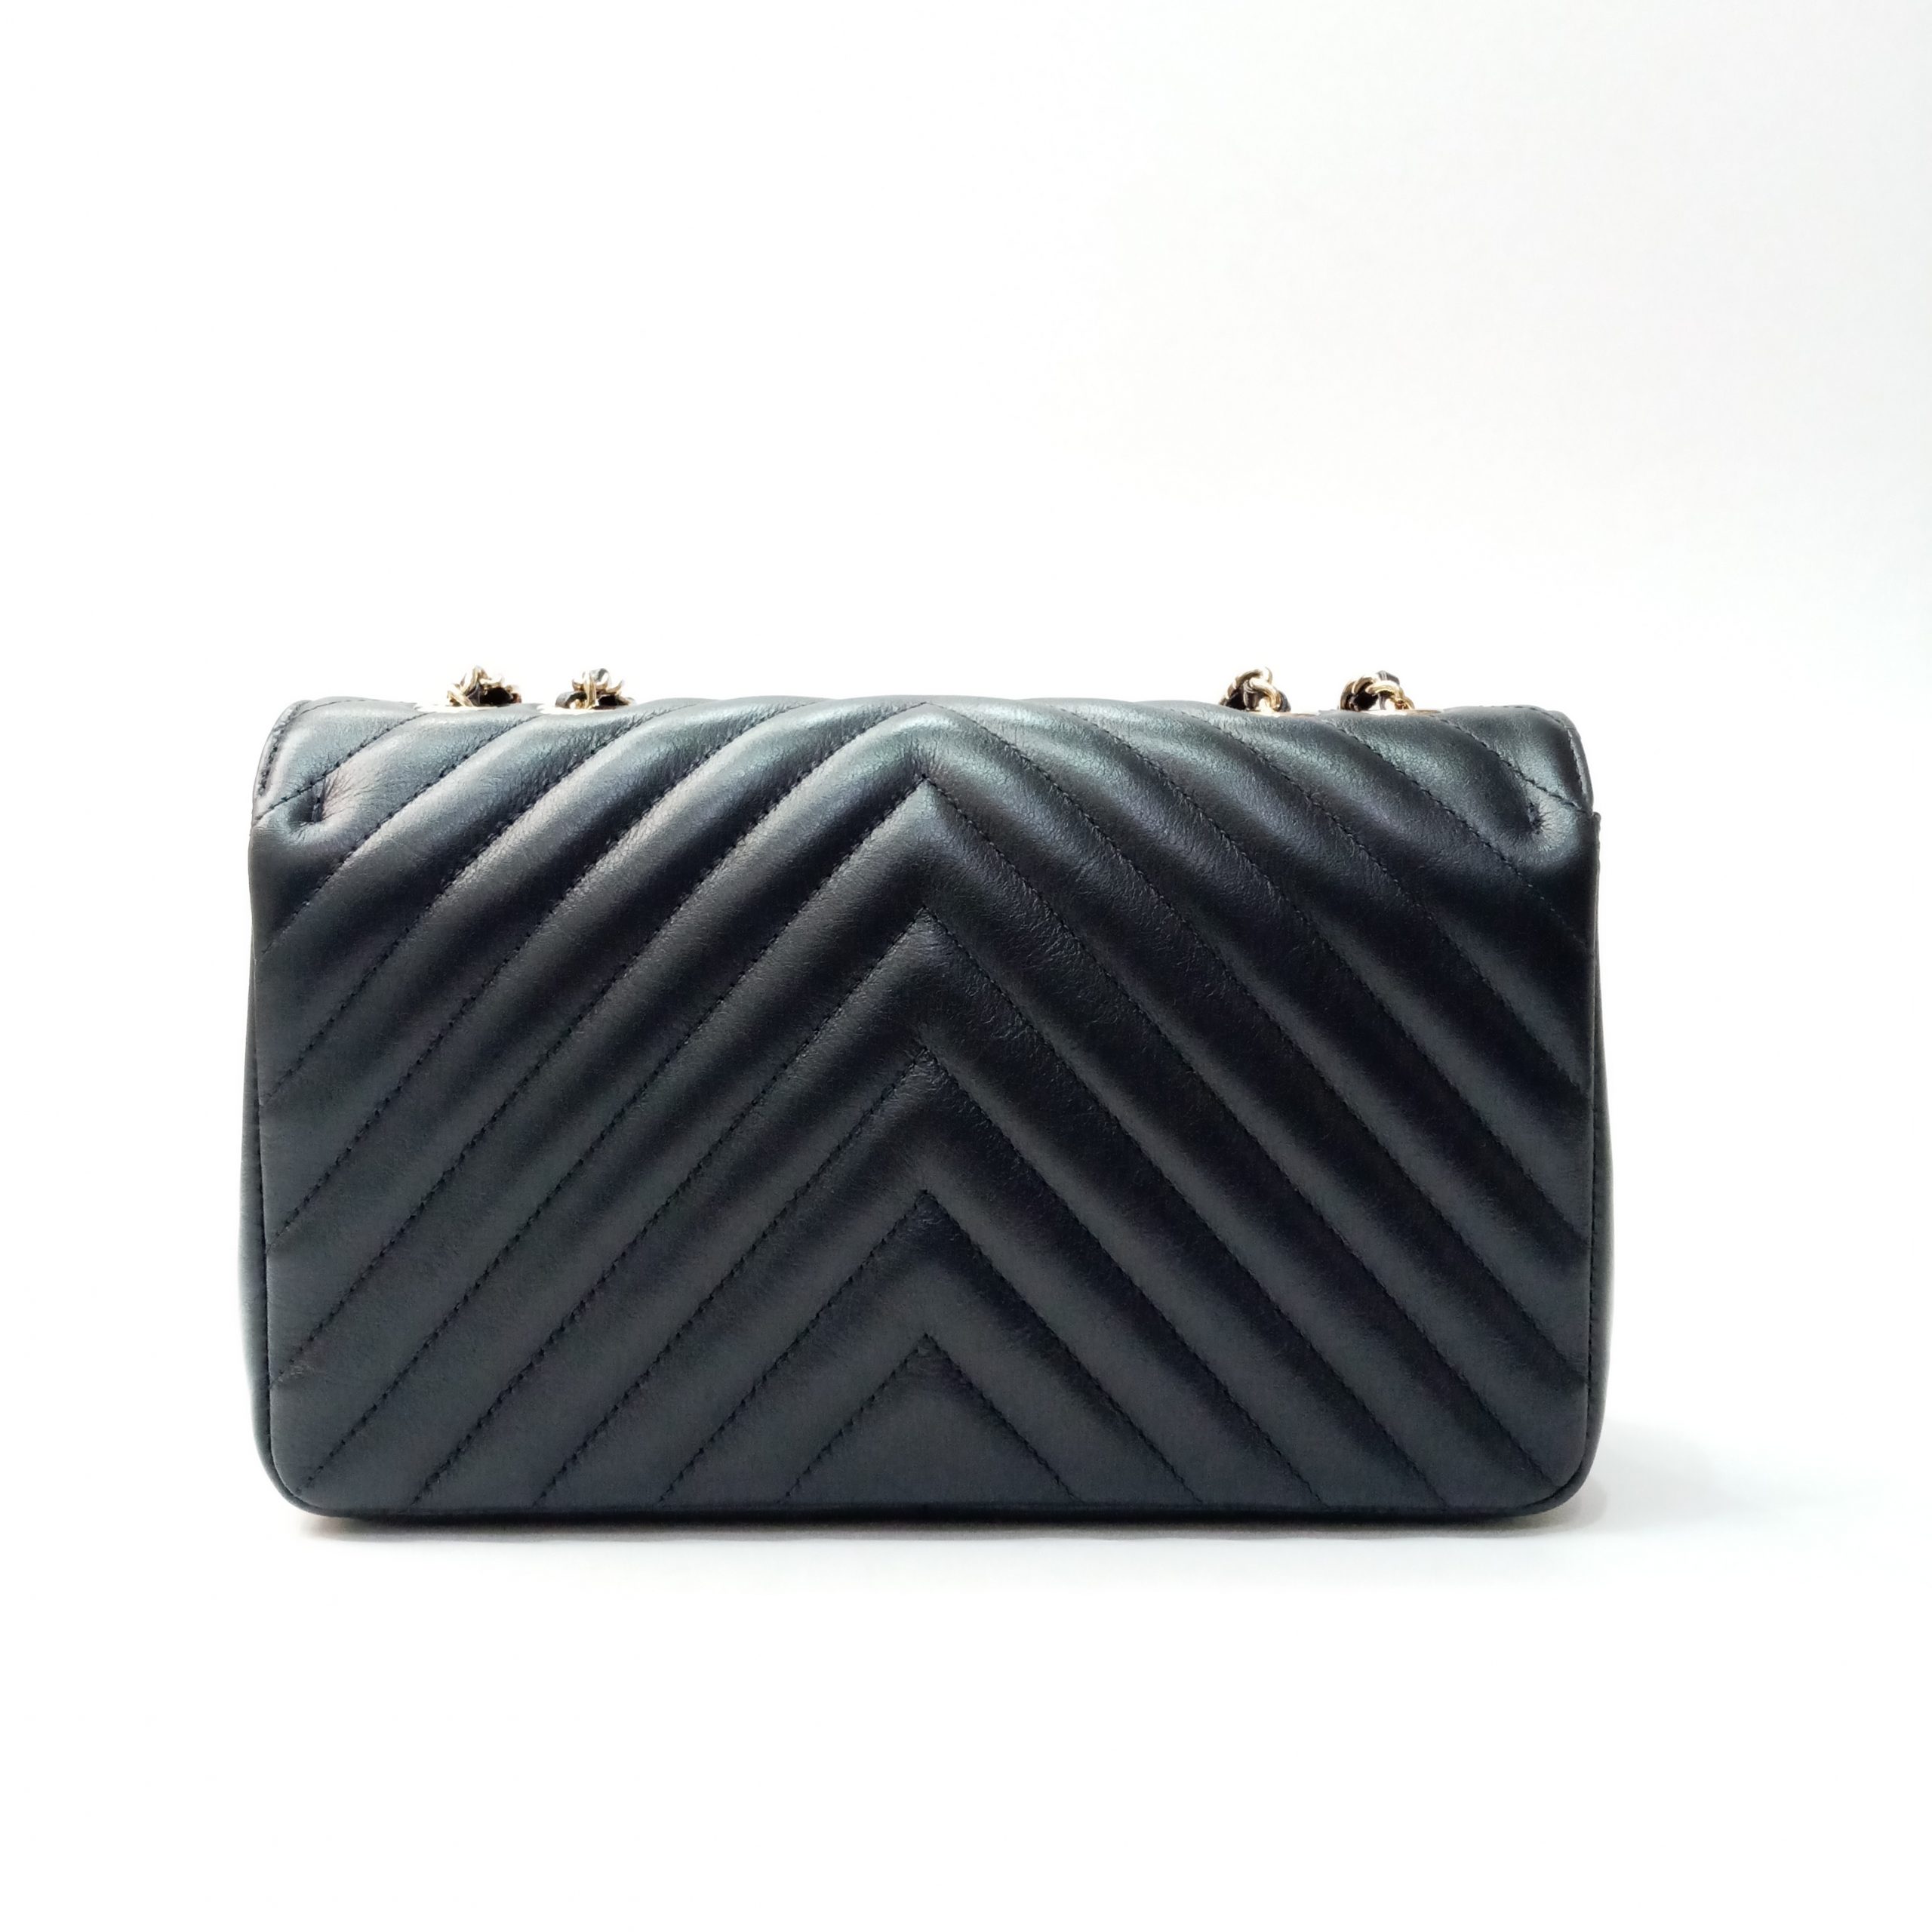 Chanel Statement Flap GHW Small